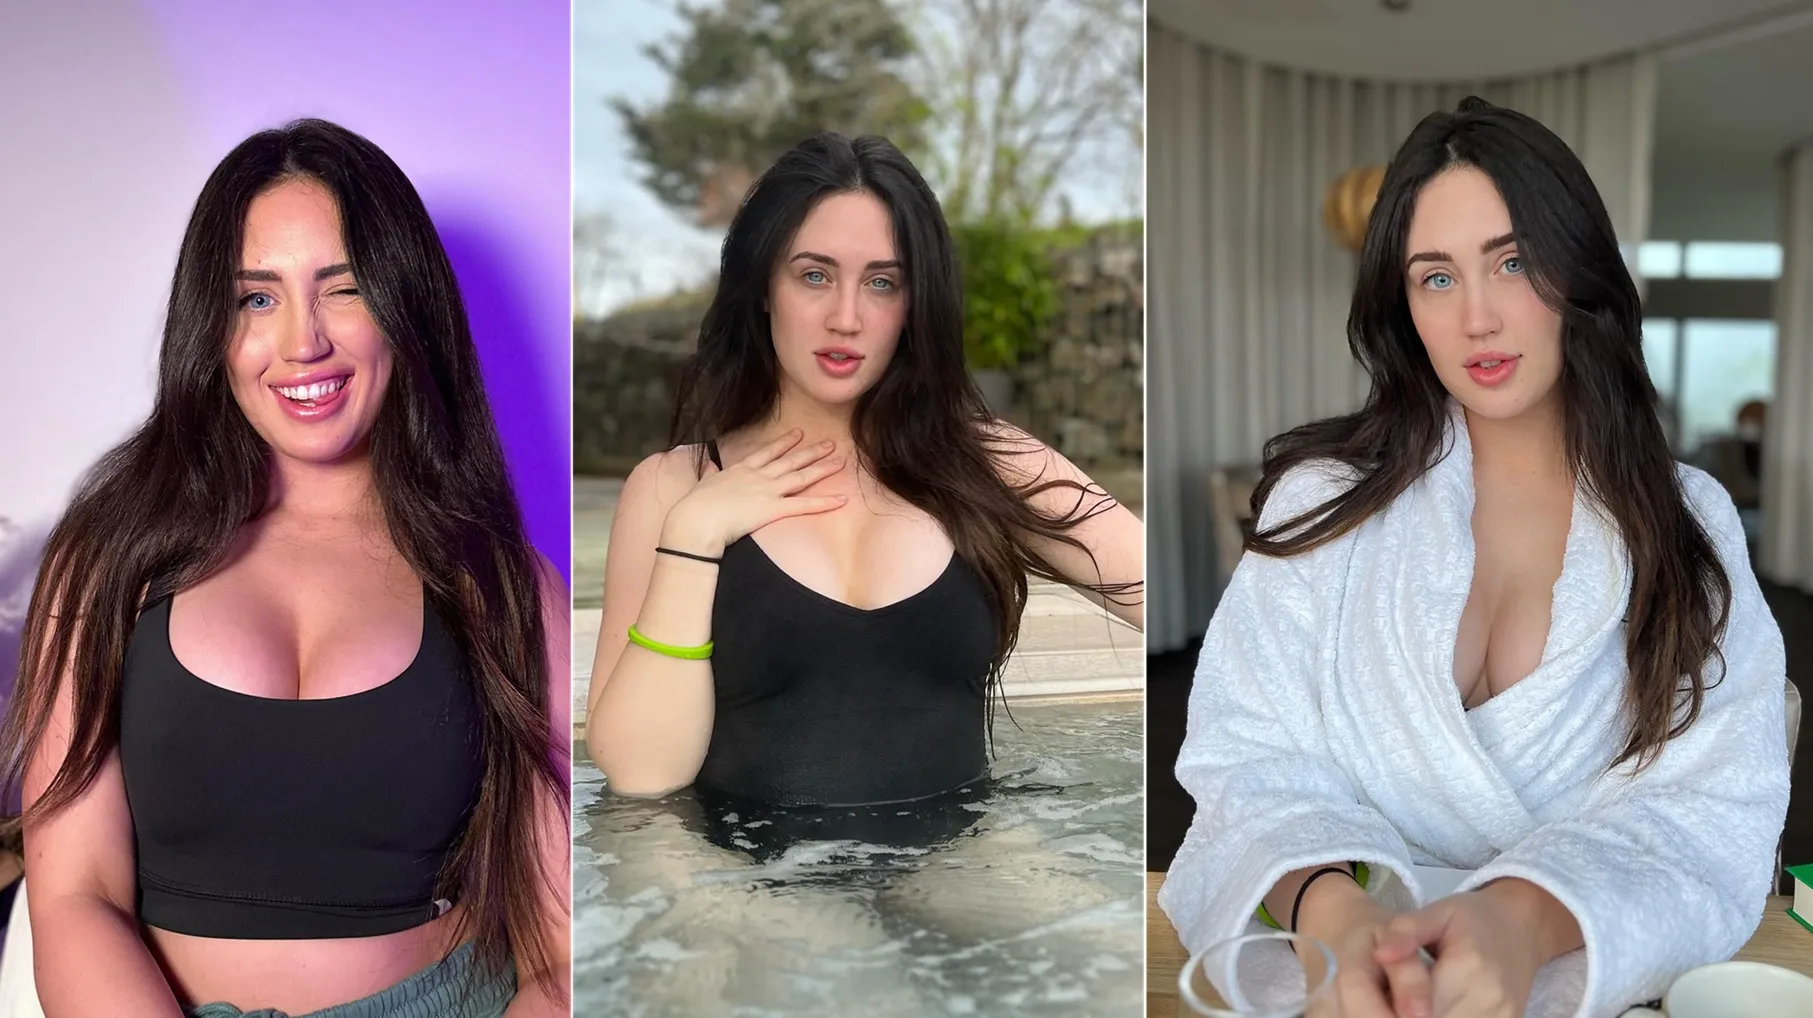 Taylor Ryan makes thousands at just 26 as she looks like Megan Fox - Gossibox.com